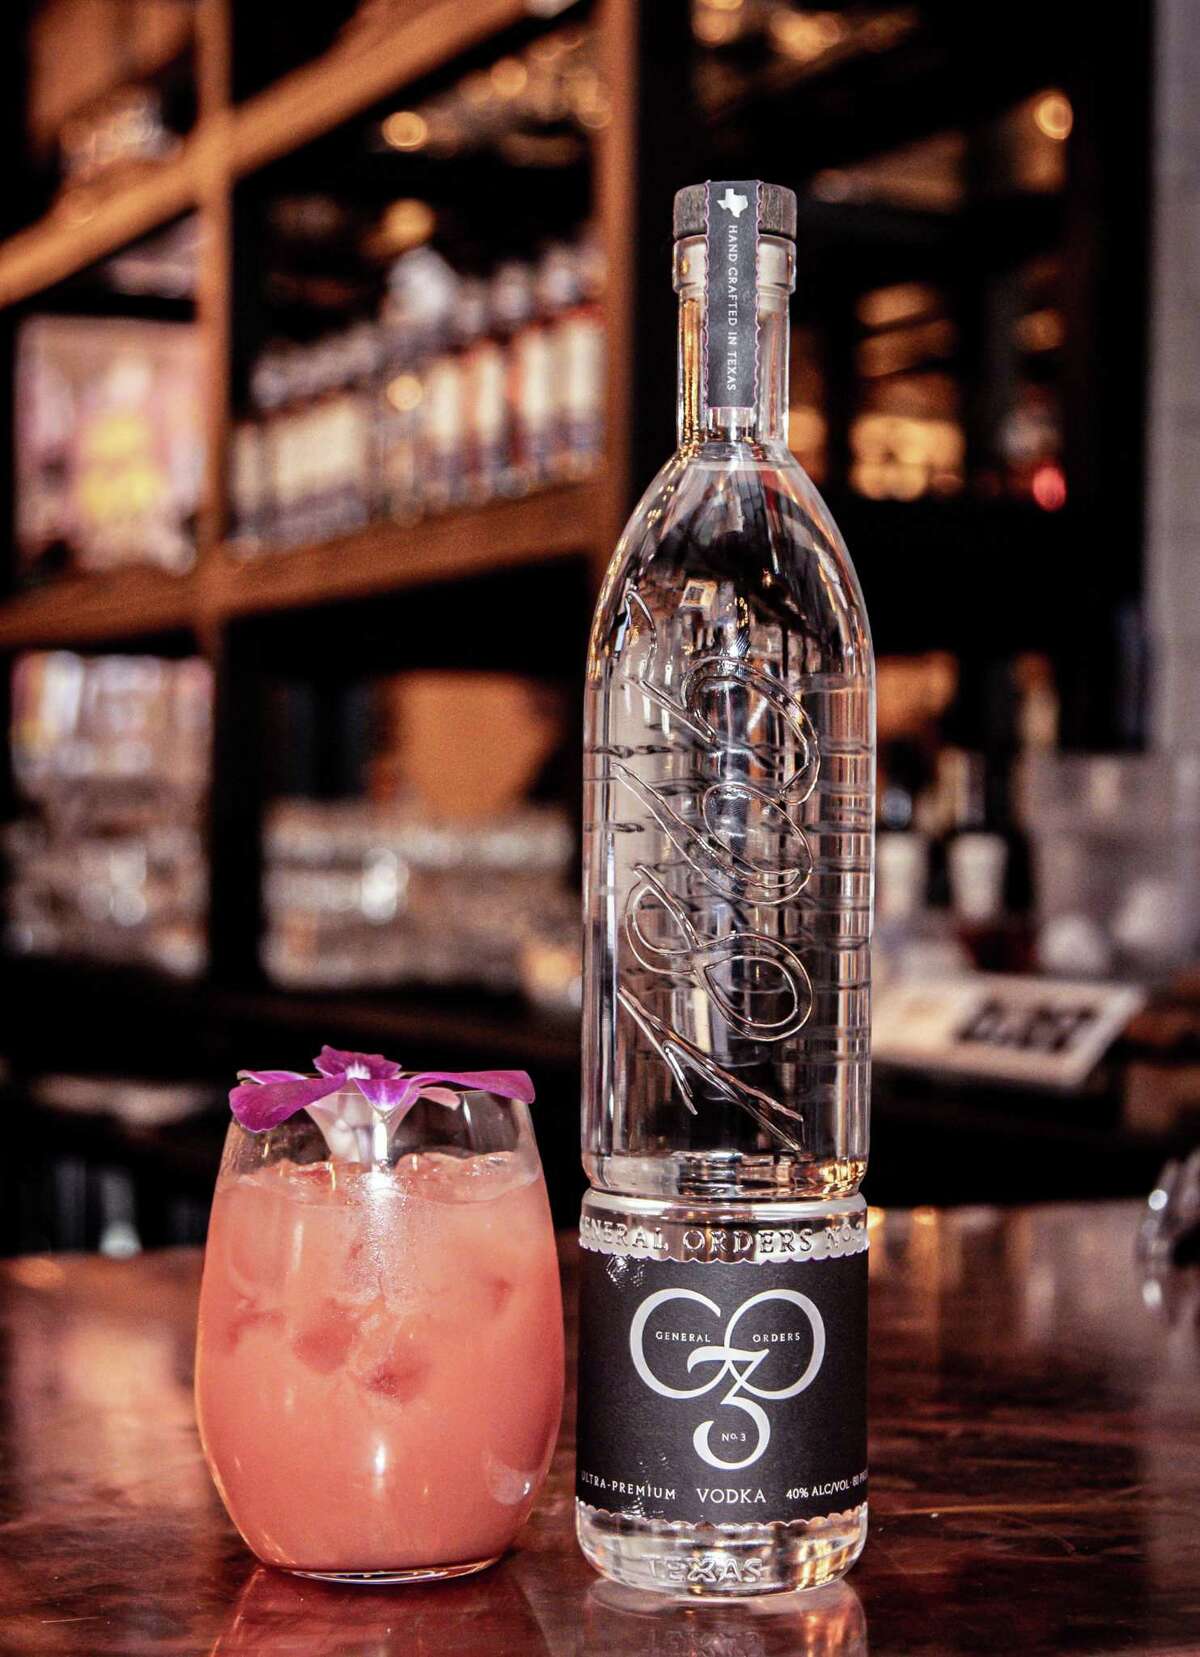 General Orders No. 3 is a new Houston-based vodka brand.